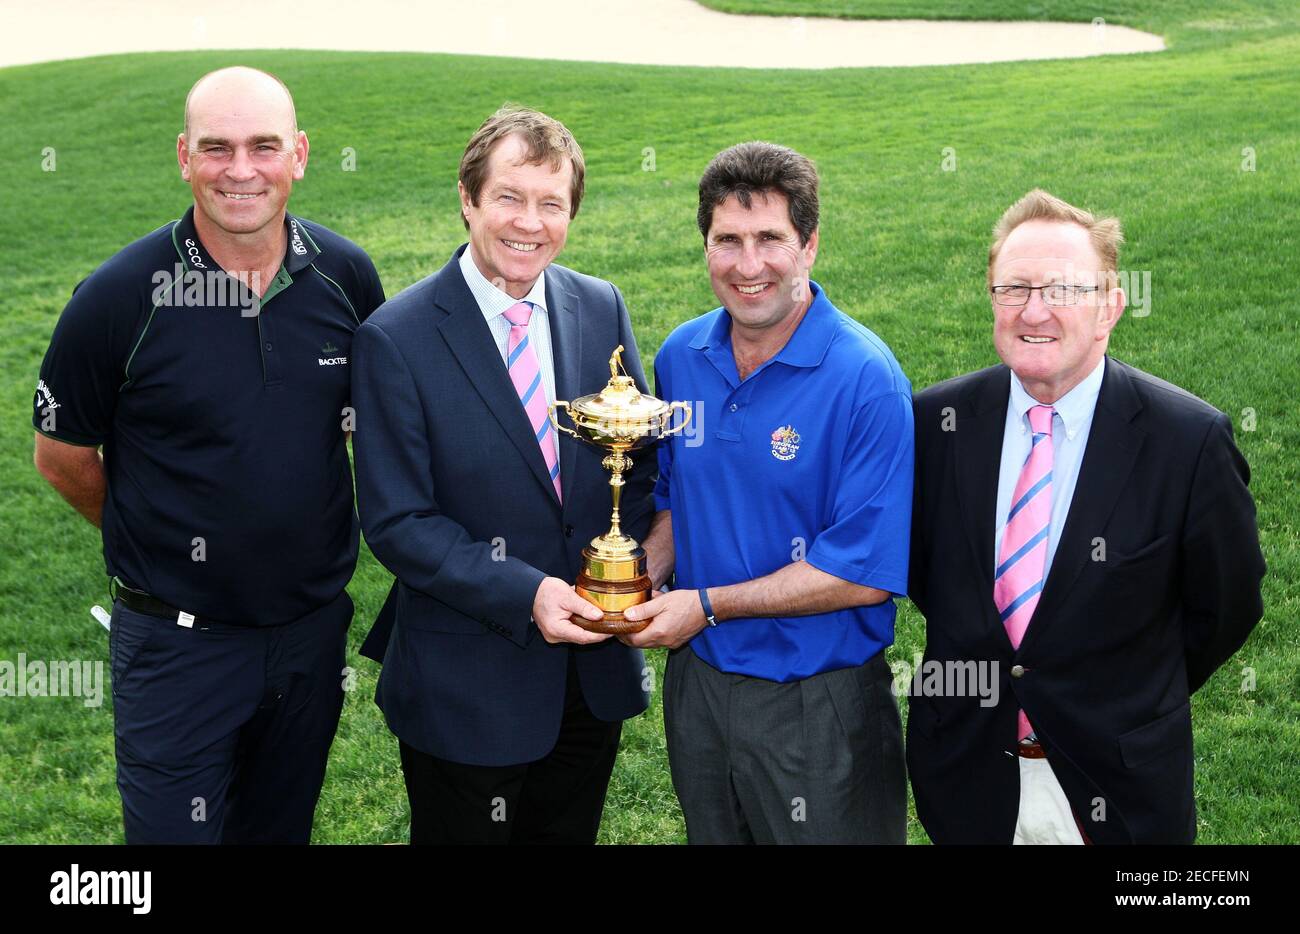 Golf - Ryder Cup Press Conference - Abu Dhabi Golf Club - 18/1/11 Spain's  Jose Maria Olazabal (2nd R) poses with Chairman of the European Tour  Tournament Committee Thomas Bjorn (L), chief